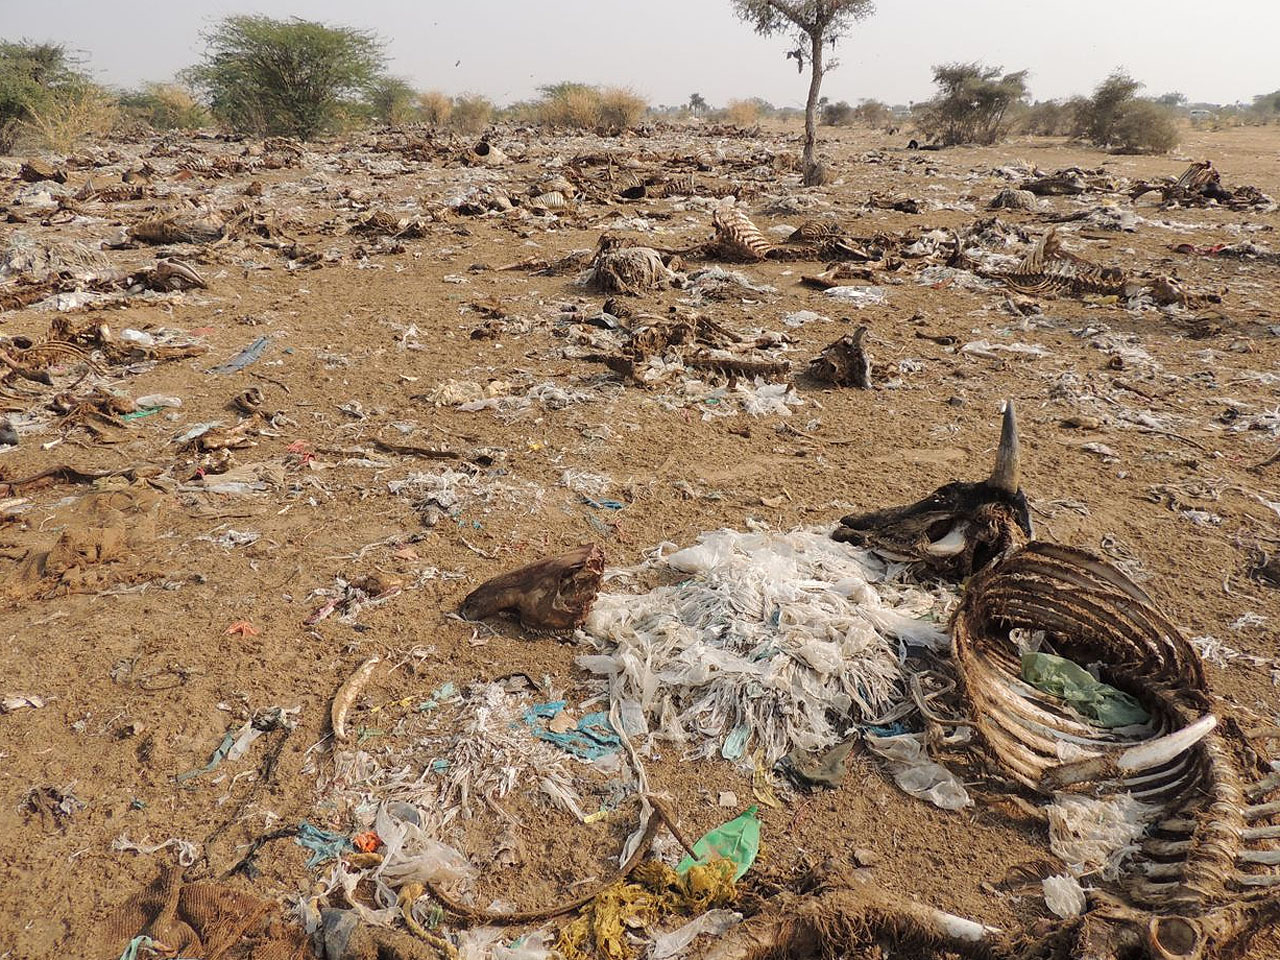 In Indian carcass fields, pollution's impact takes unusual form - CBS News